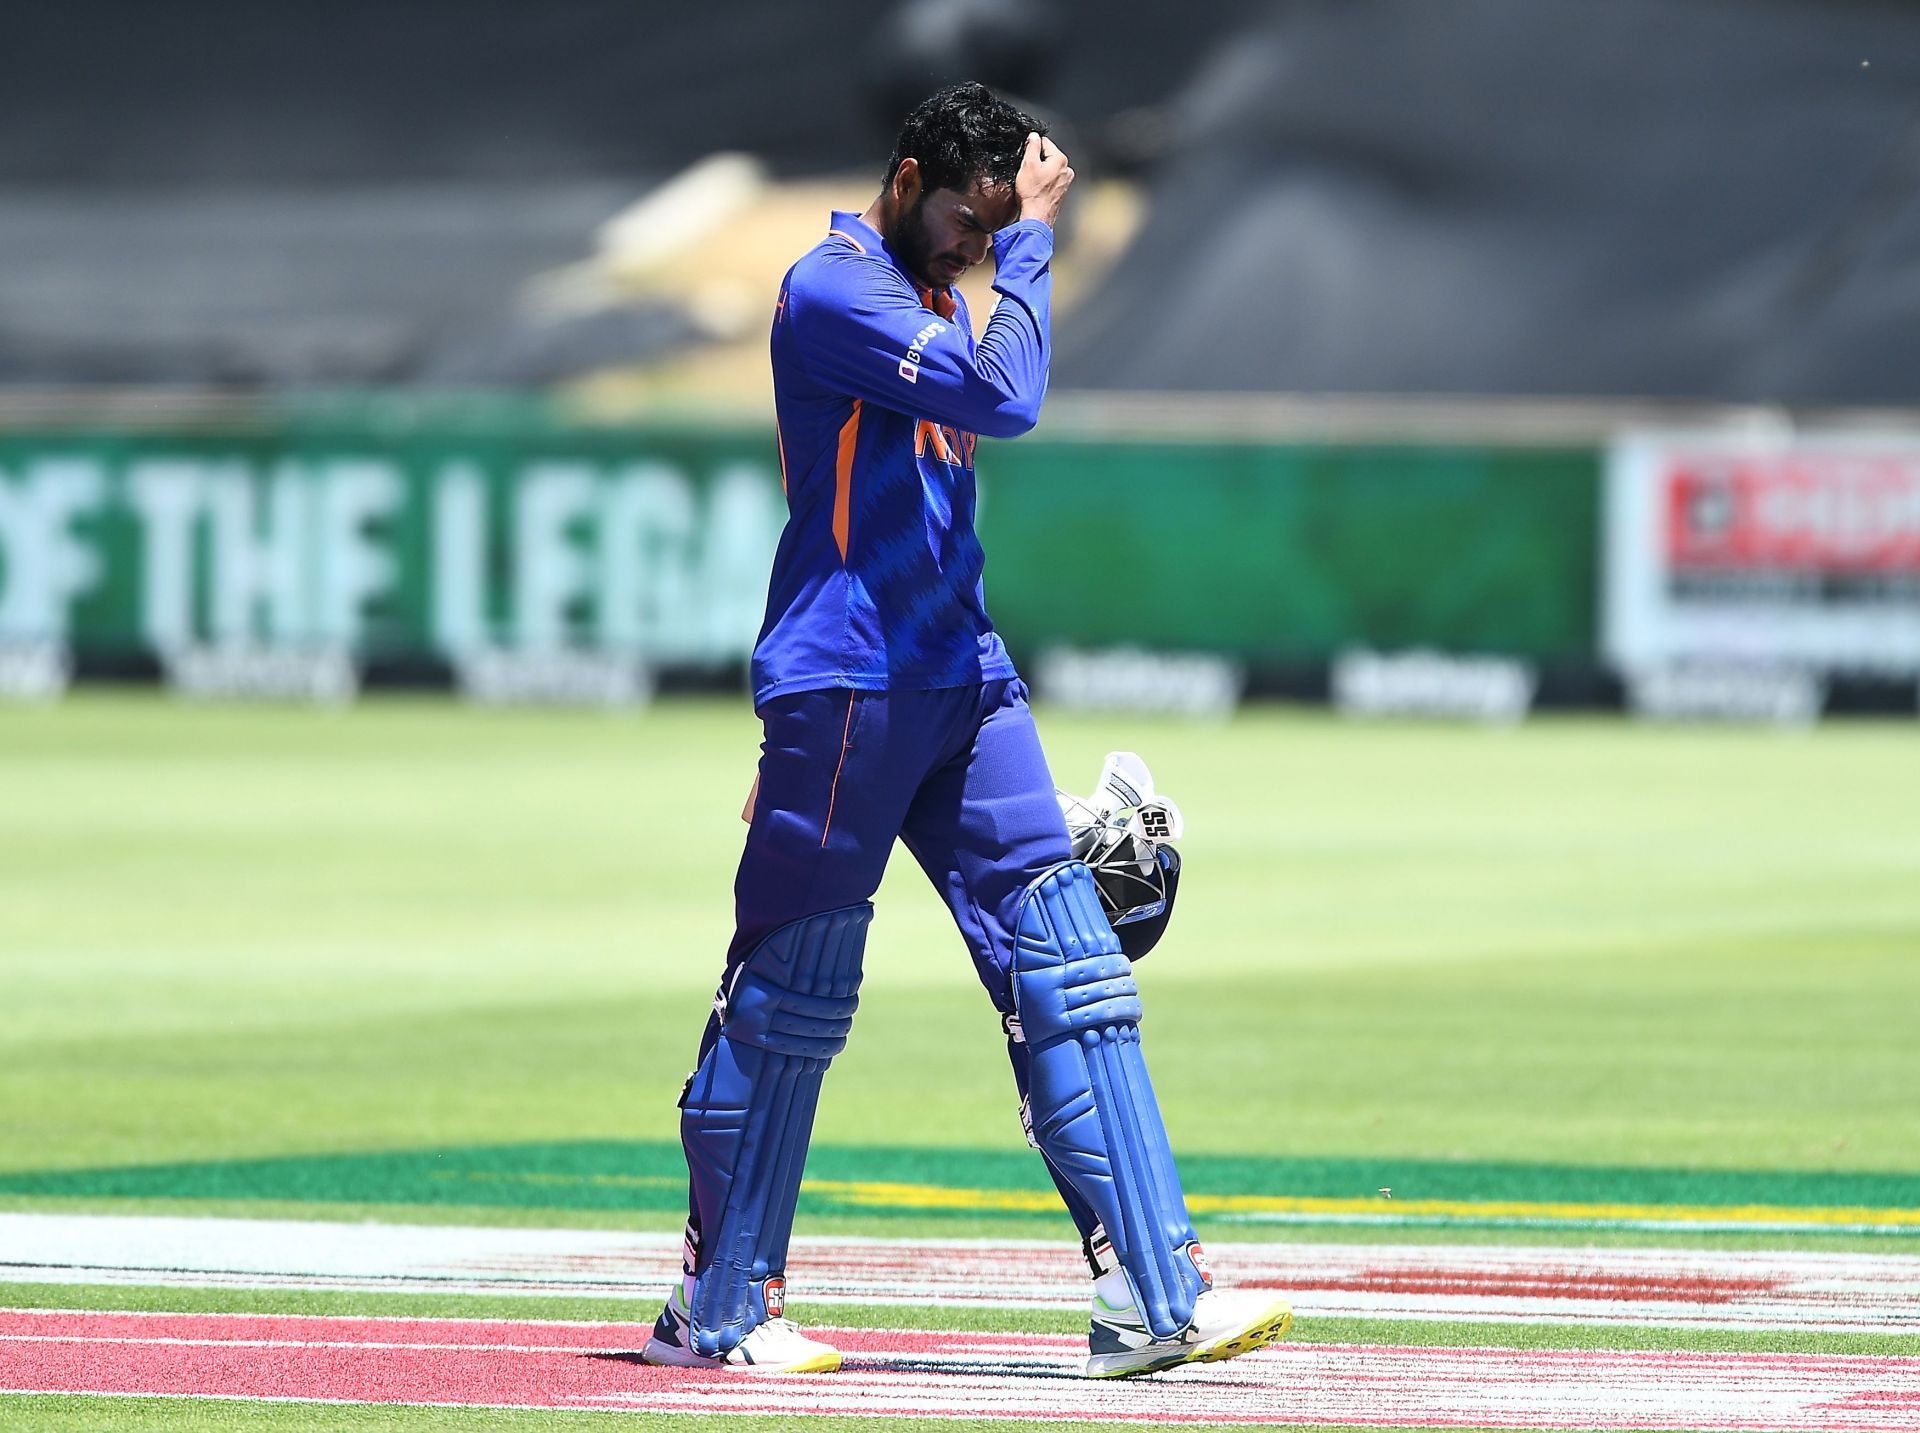 Venkatesh Iyer scored 24 runs and bowled 5 overs in what was his debut ODI series